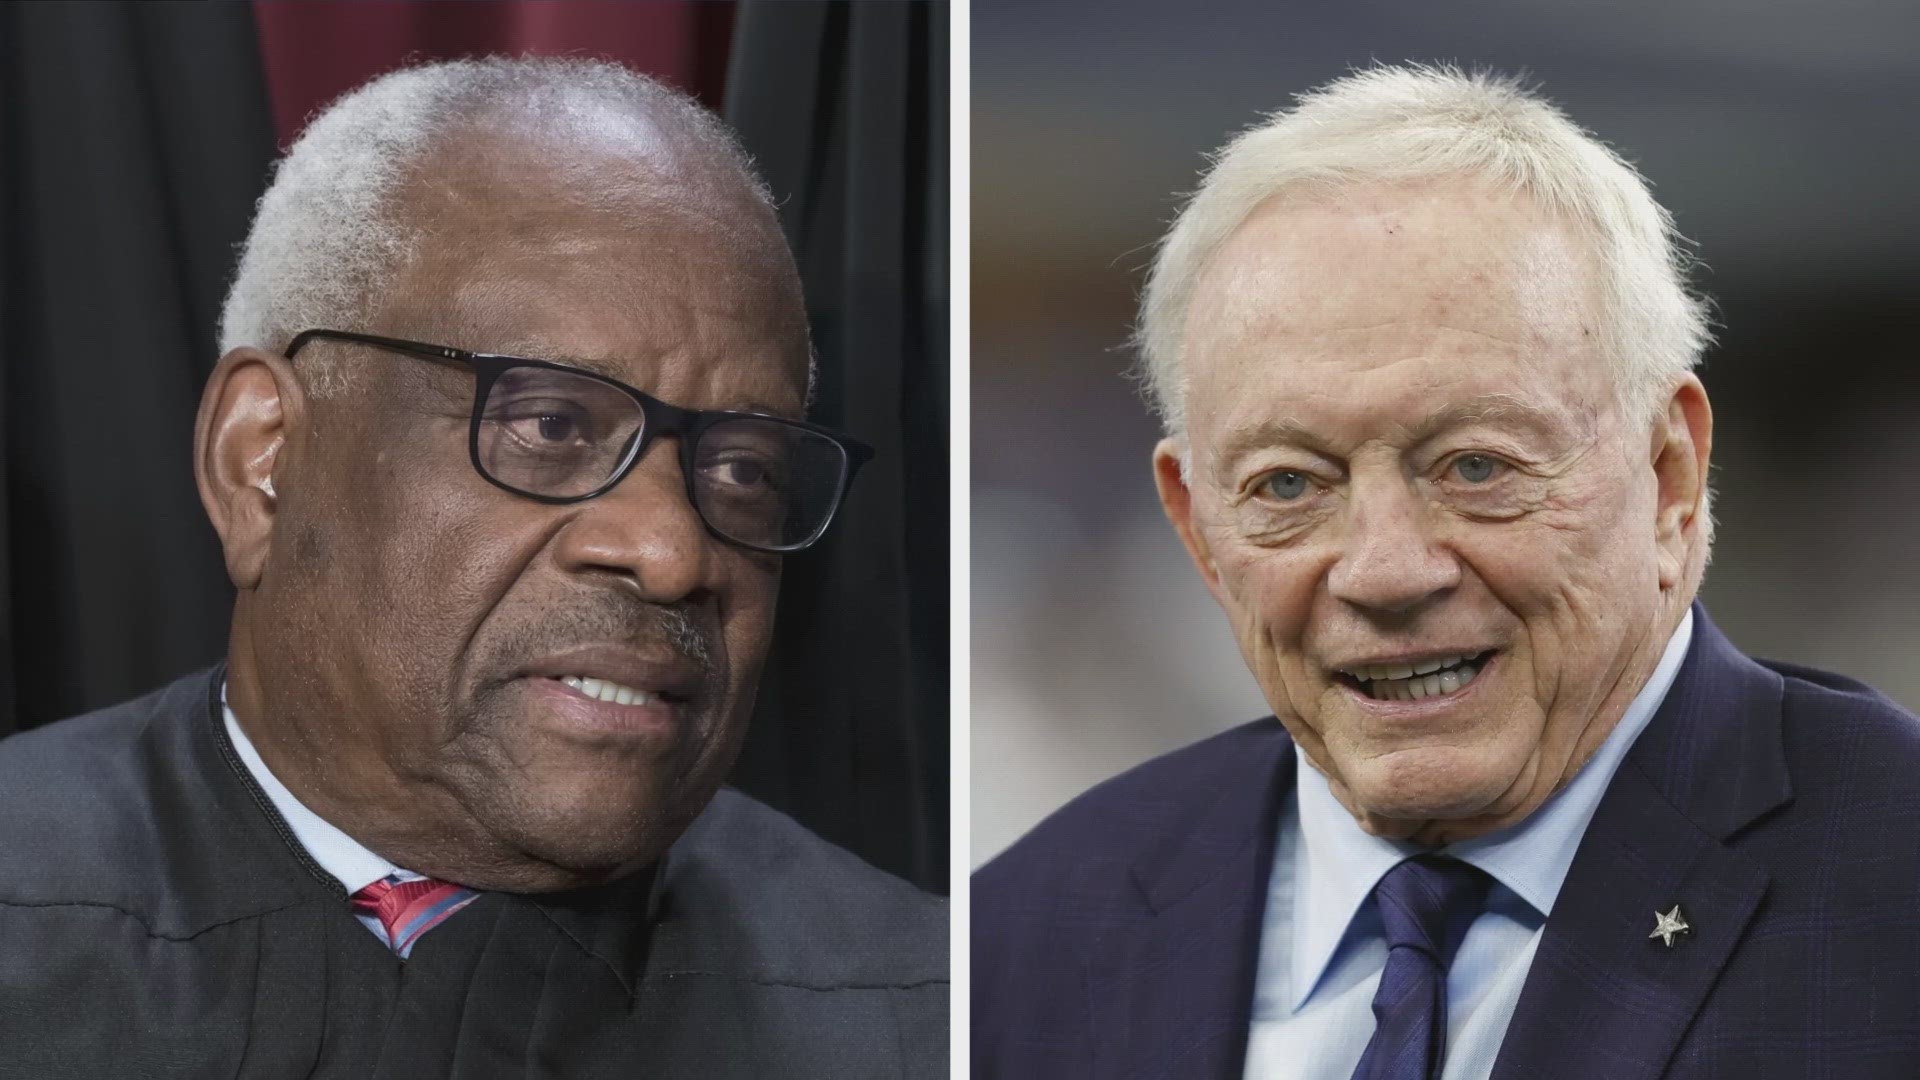 Jerry Jones has been linked to Supreme Court Justice Clarence Thomas in new reporting by the New York Times.